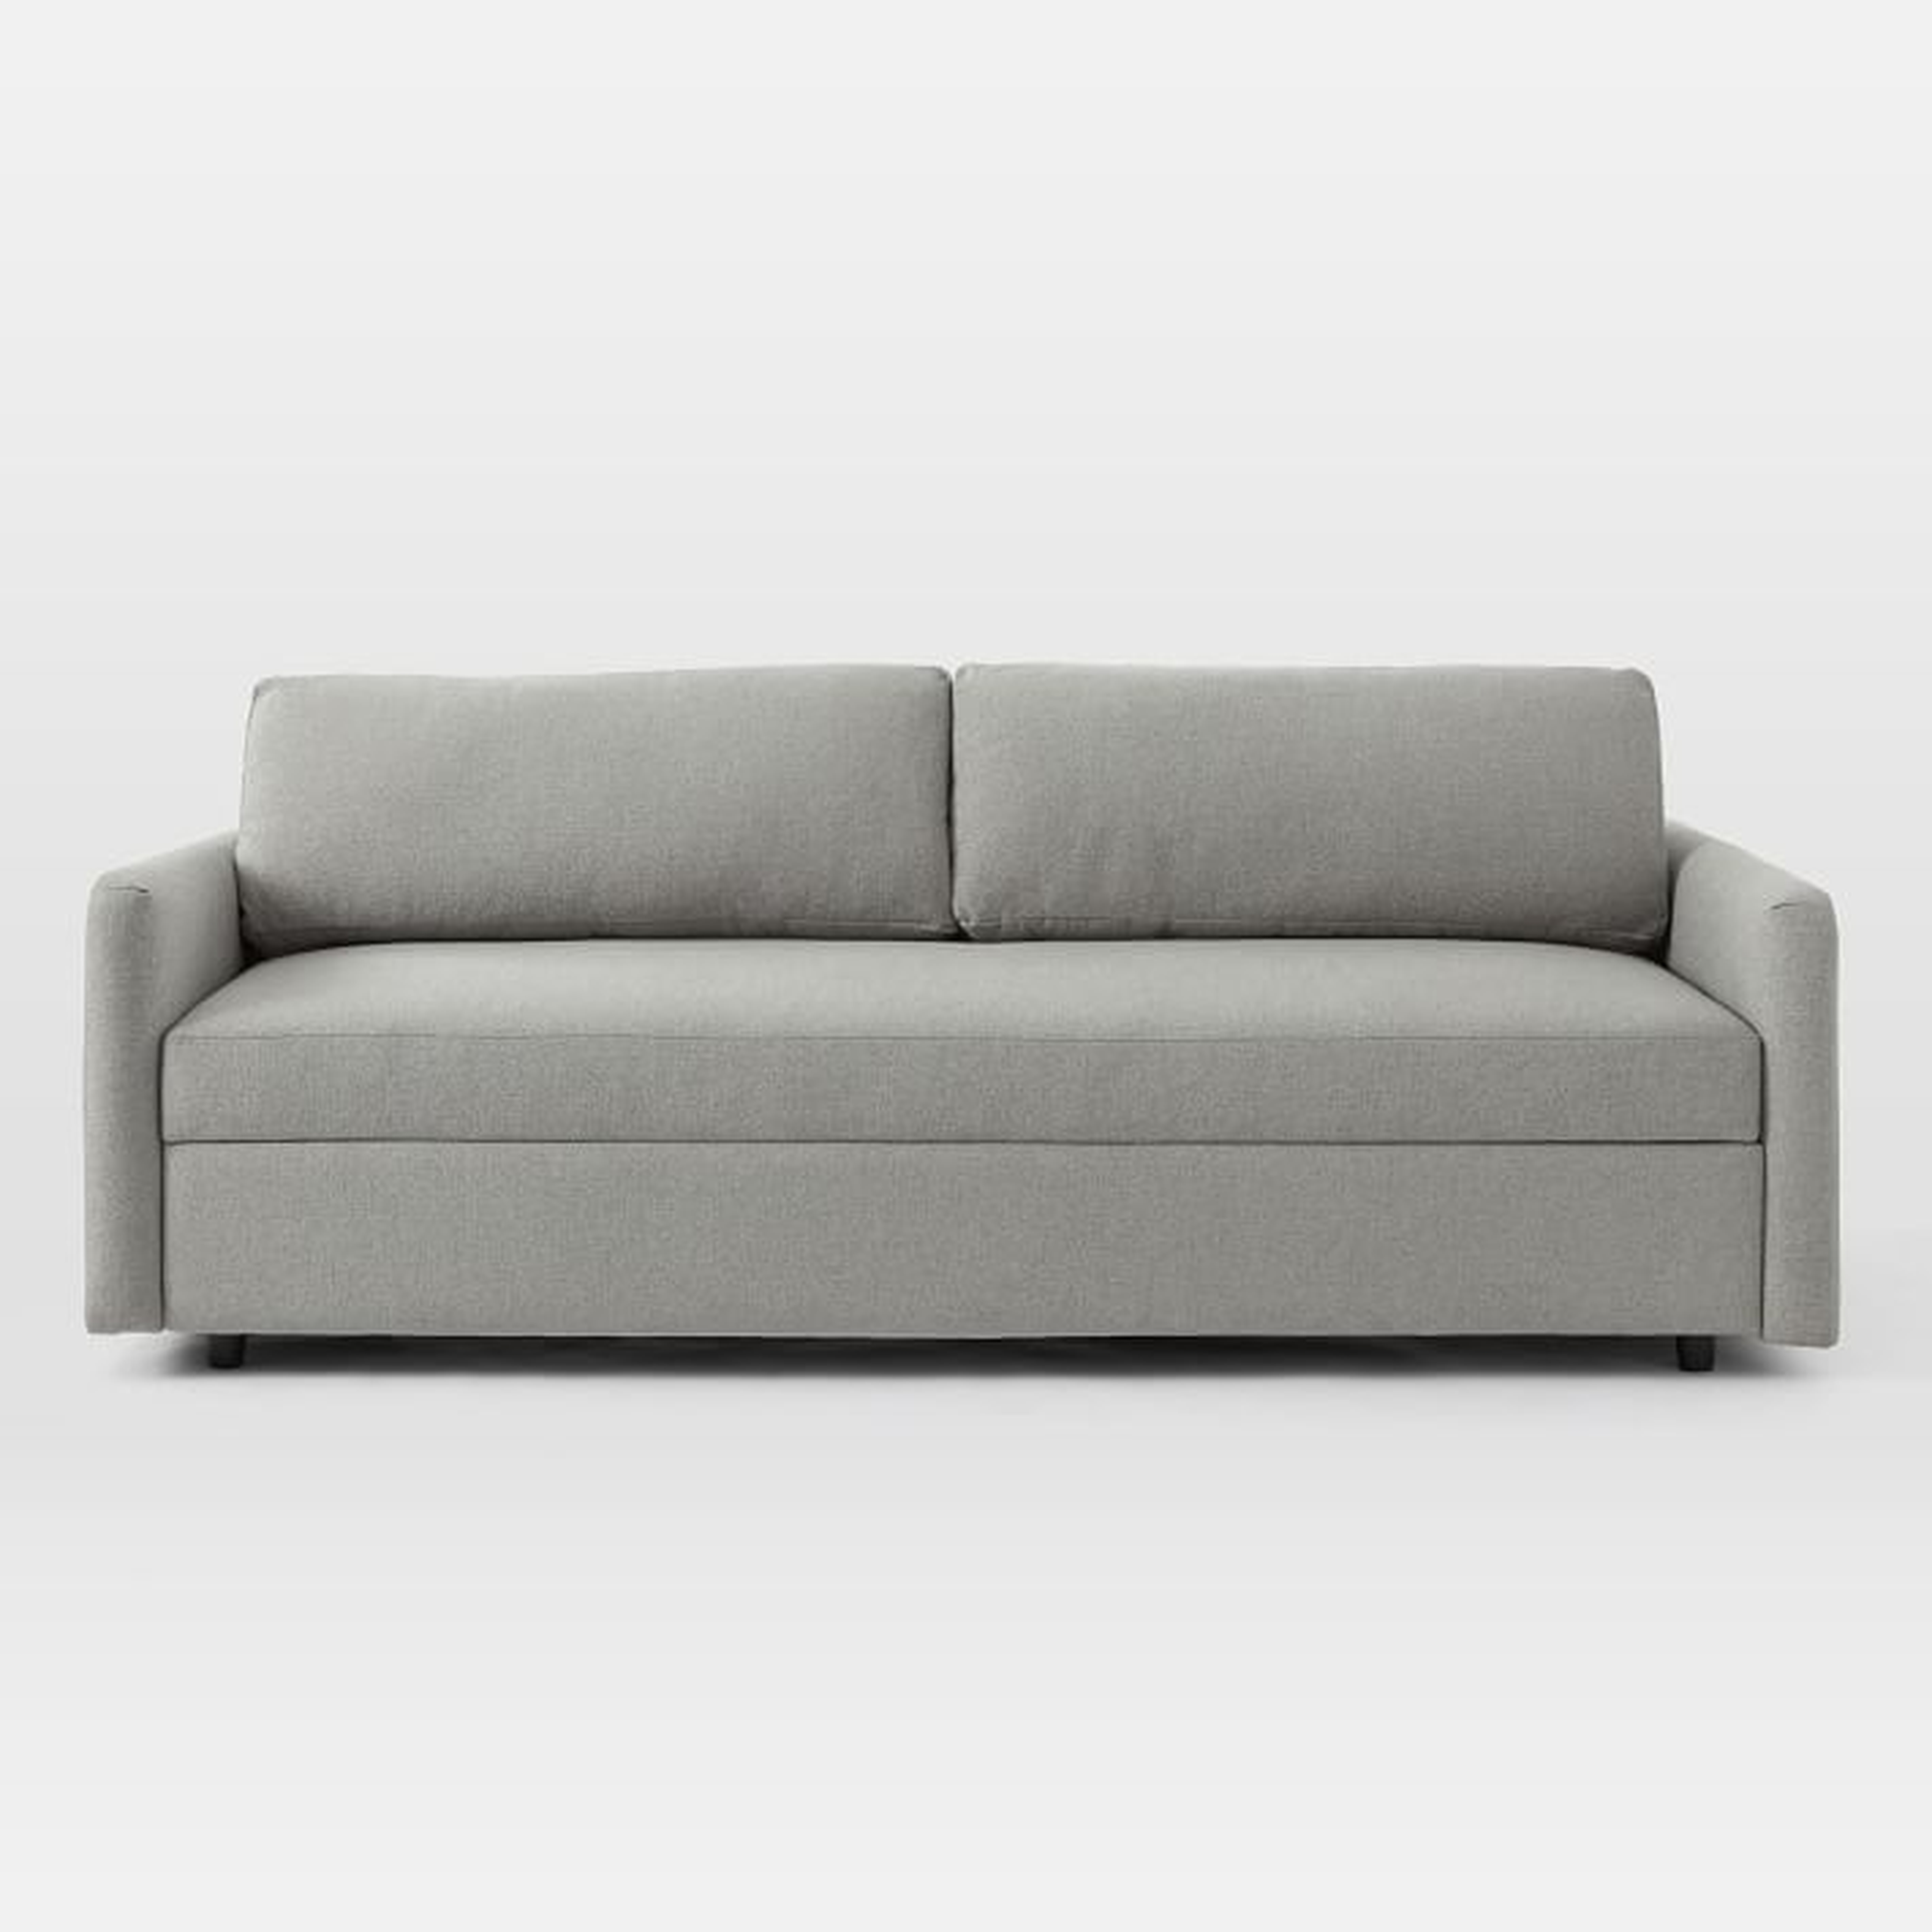 Clara Sleeper Sofa, Chenille Tweed, Feather Gray, Concealed Supports - West Elm